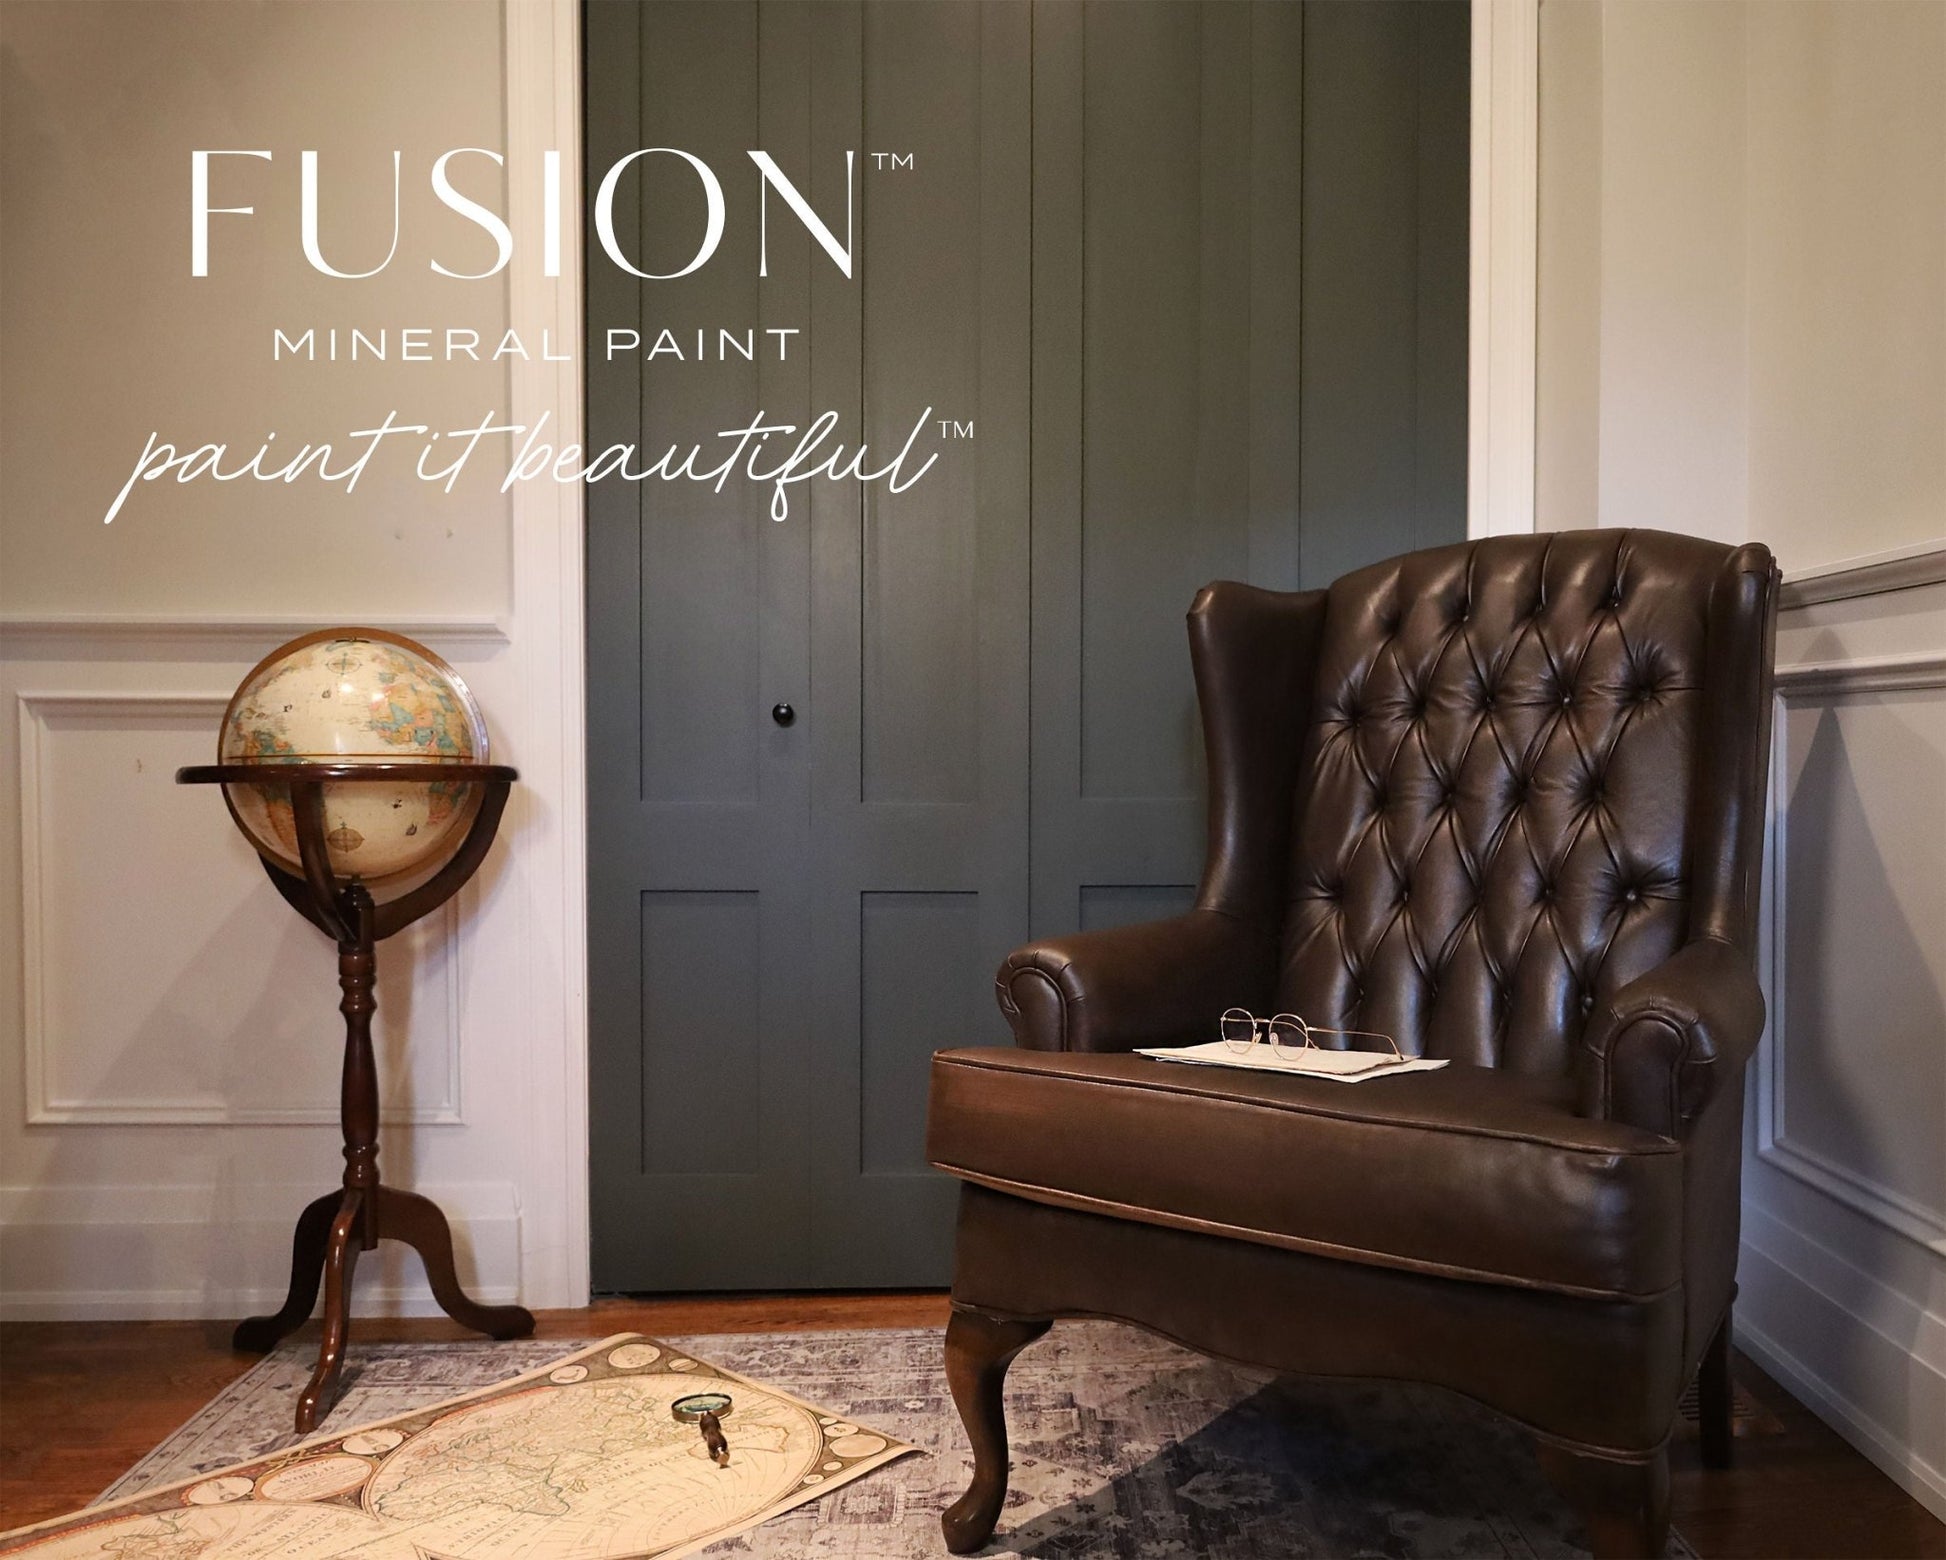 Fusion Mineral Paint - Everett - Rustic River Home